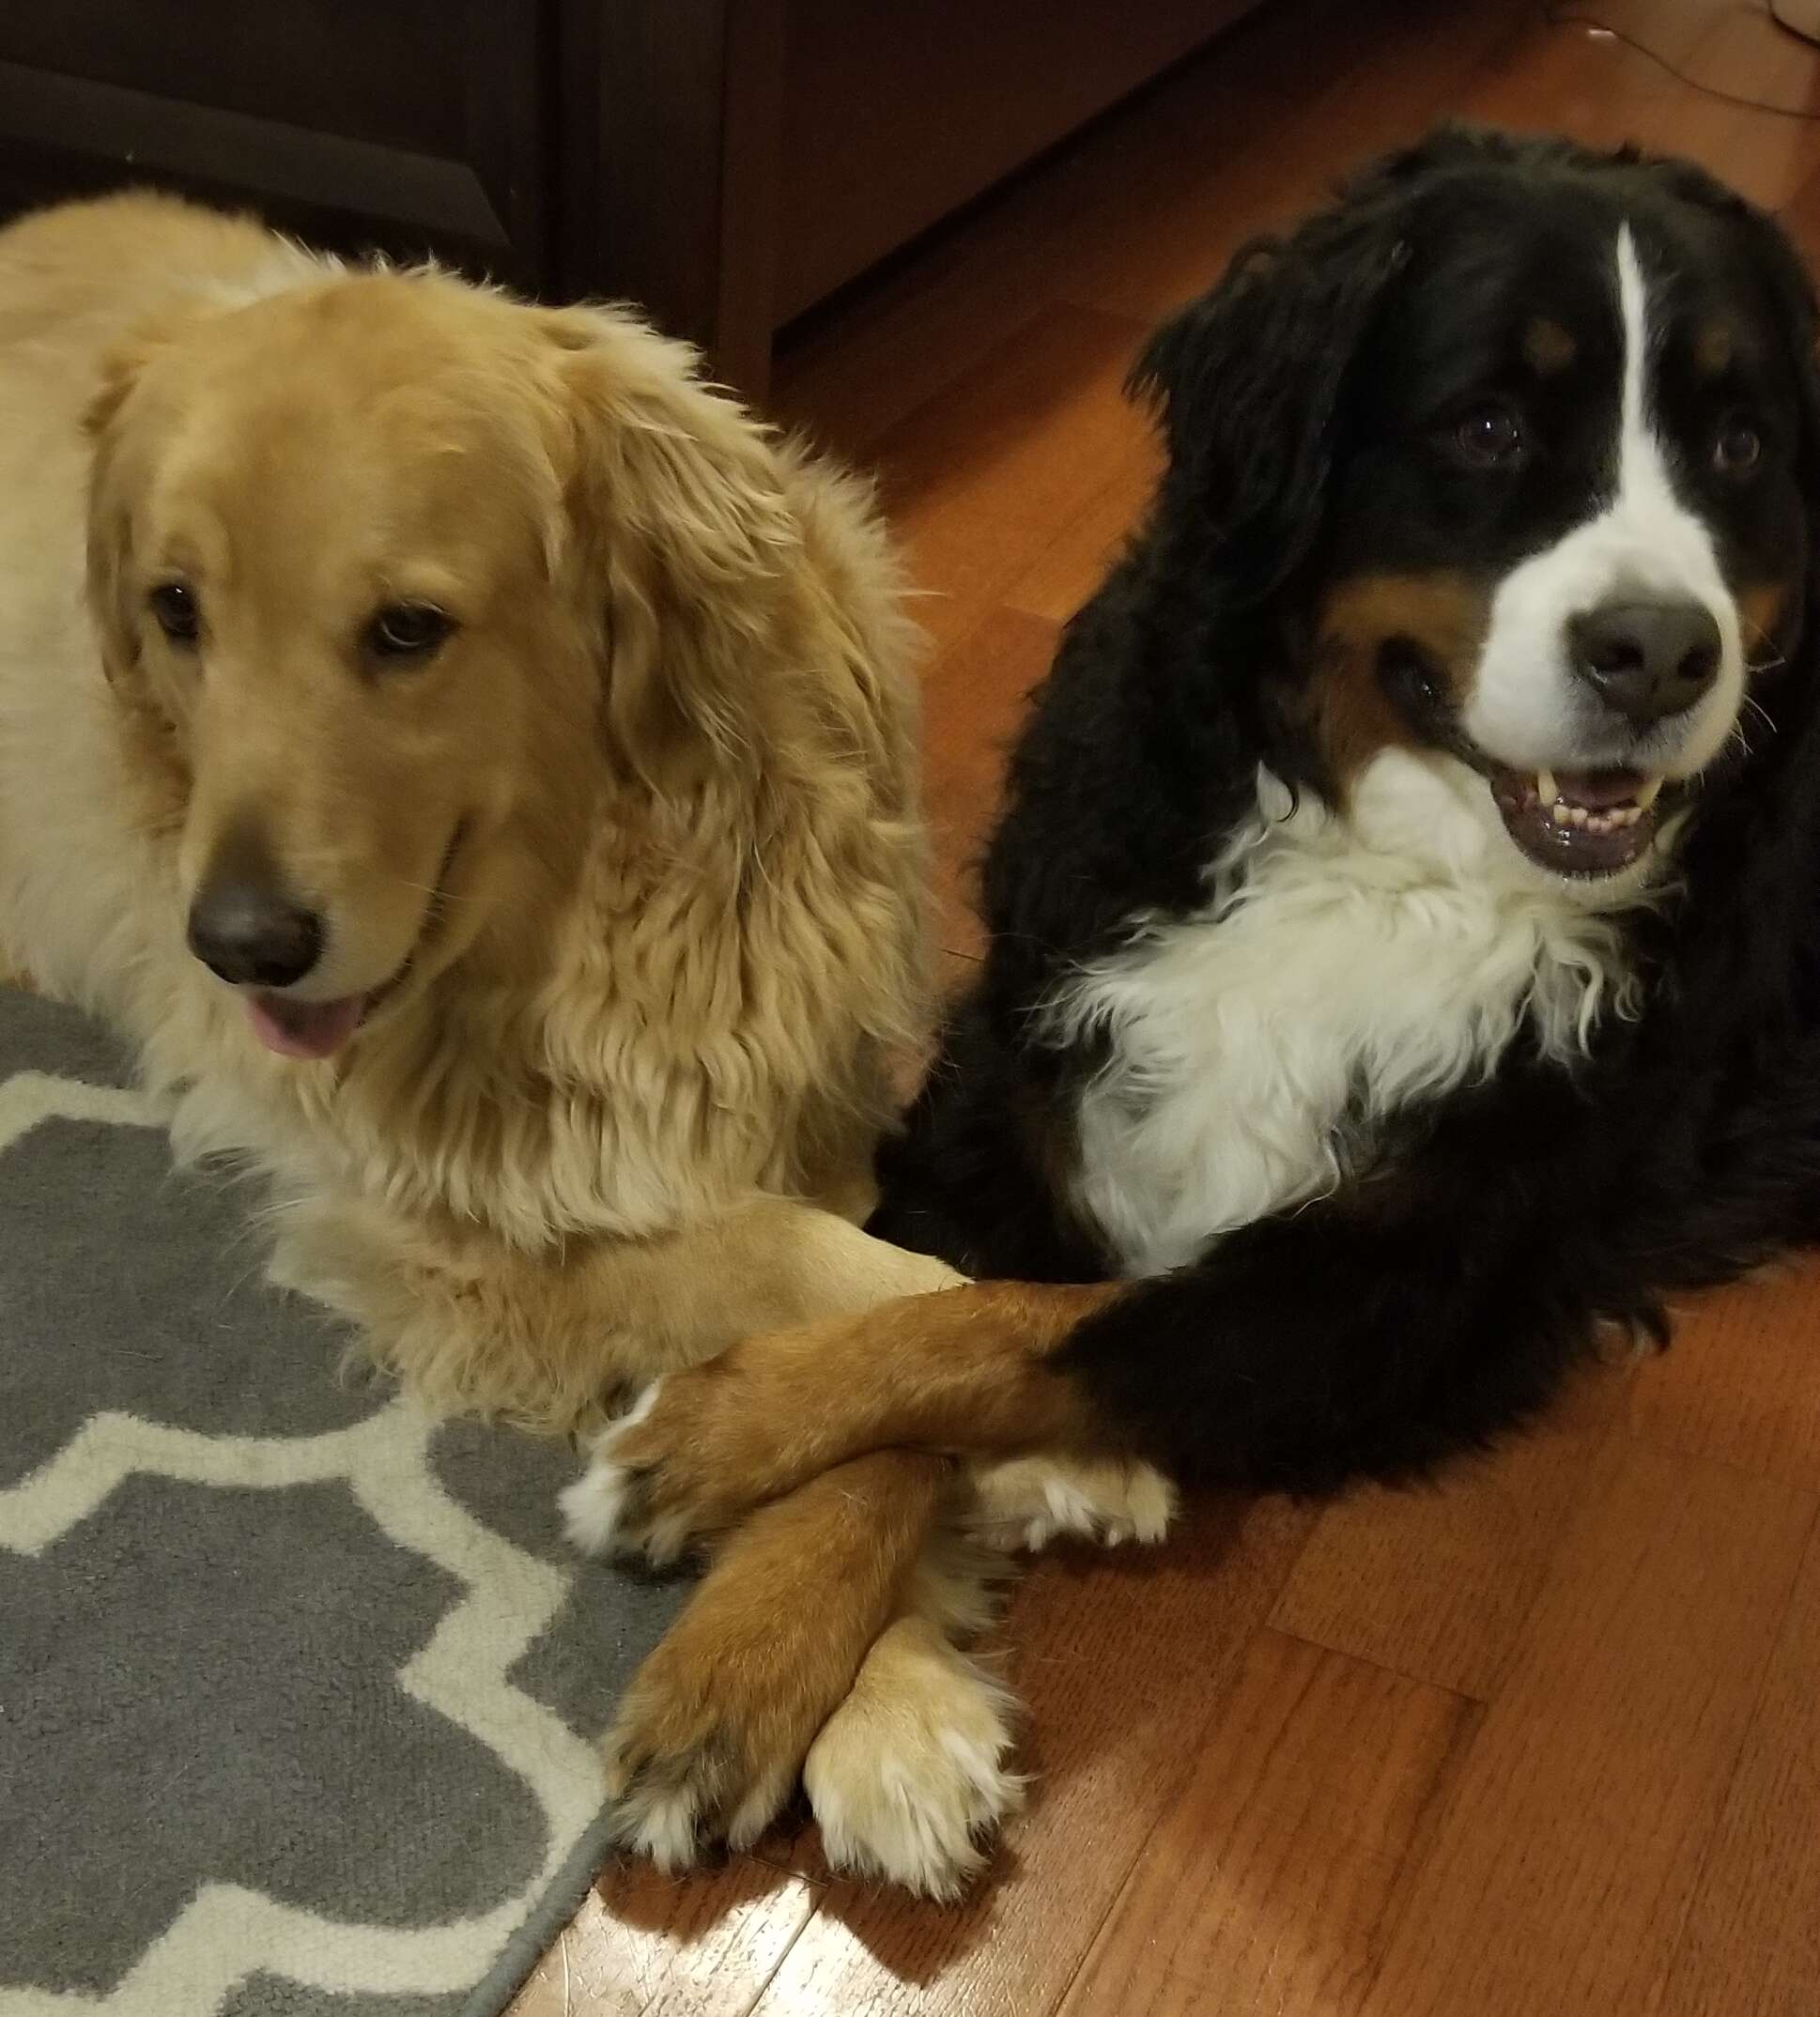 Dogs holding each other's paws